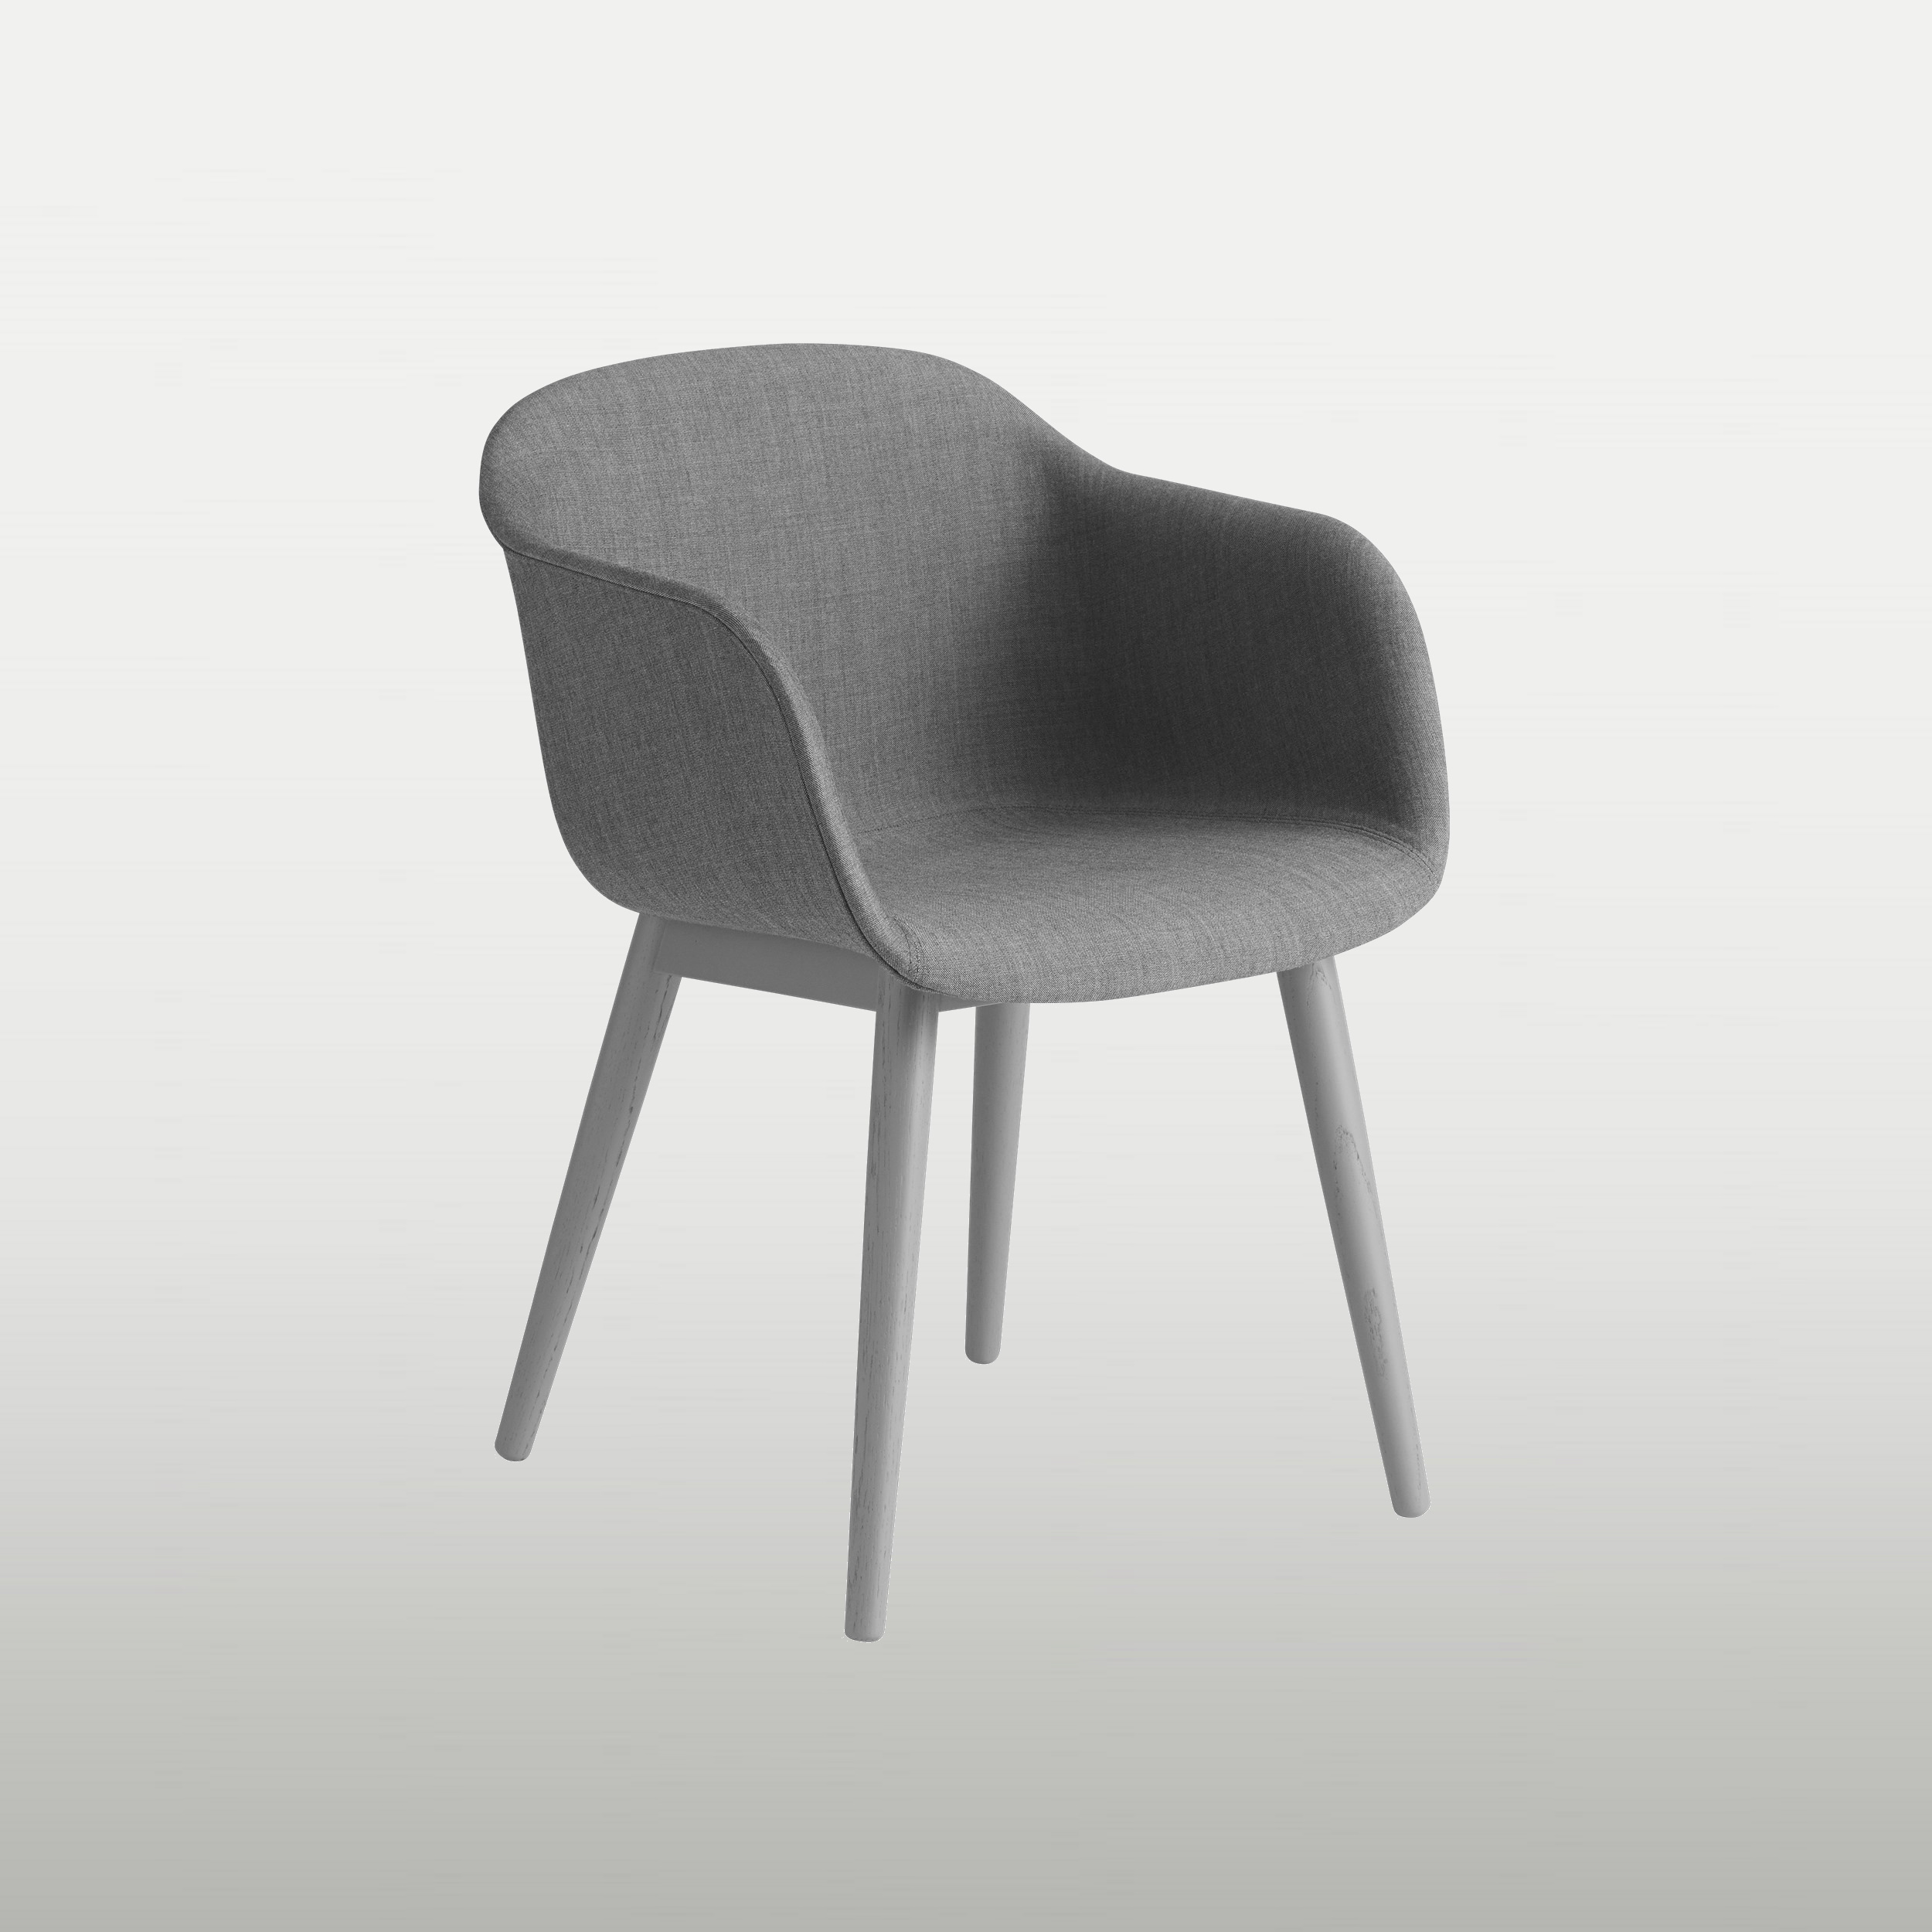 Conference chair Fiber, gray upholstery, gray wooden legs